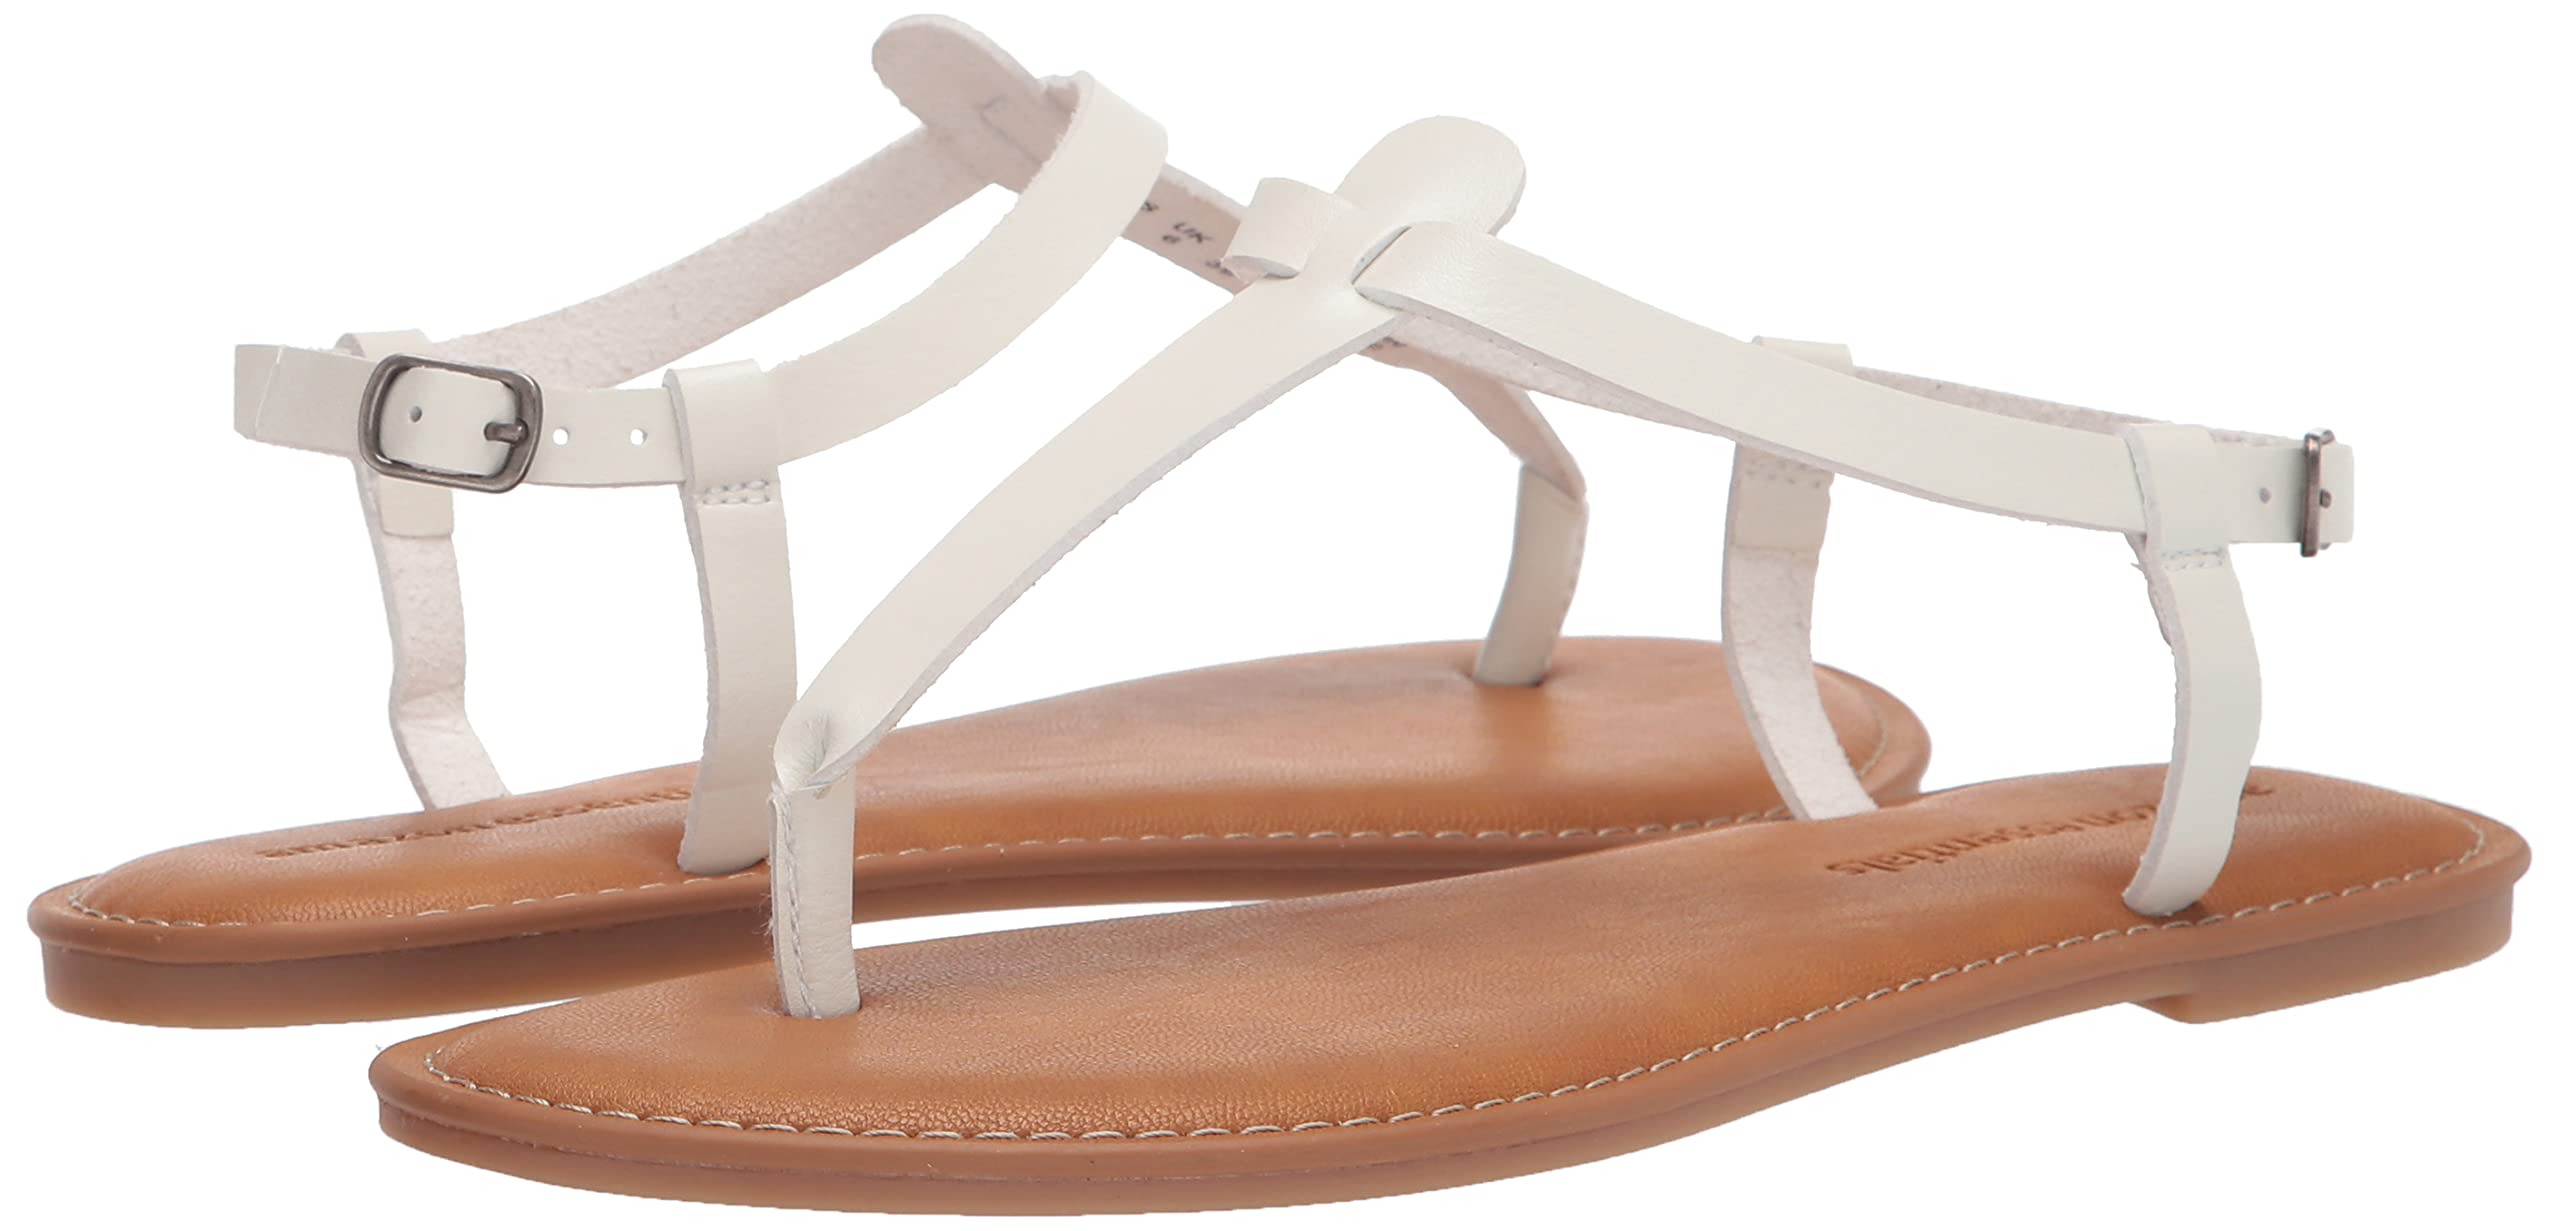 Amazon Essentials Women's Casual Thong Sandal with Ankle Strap